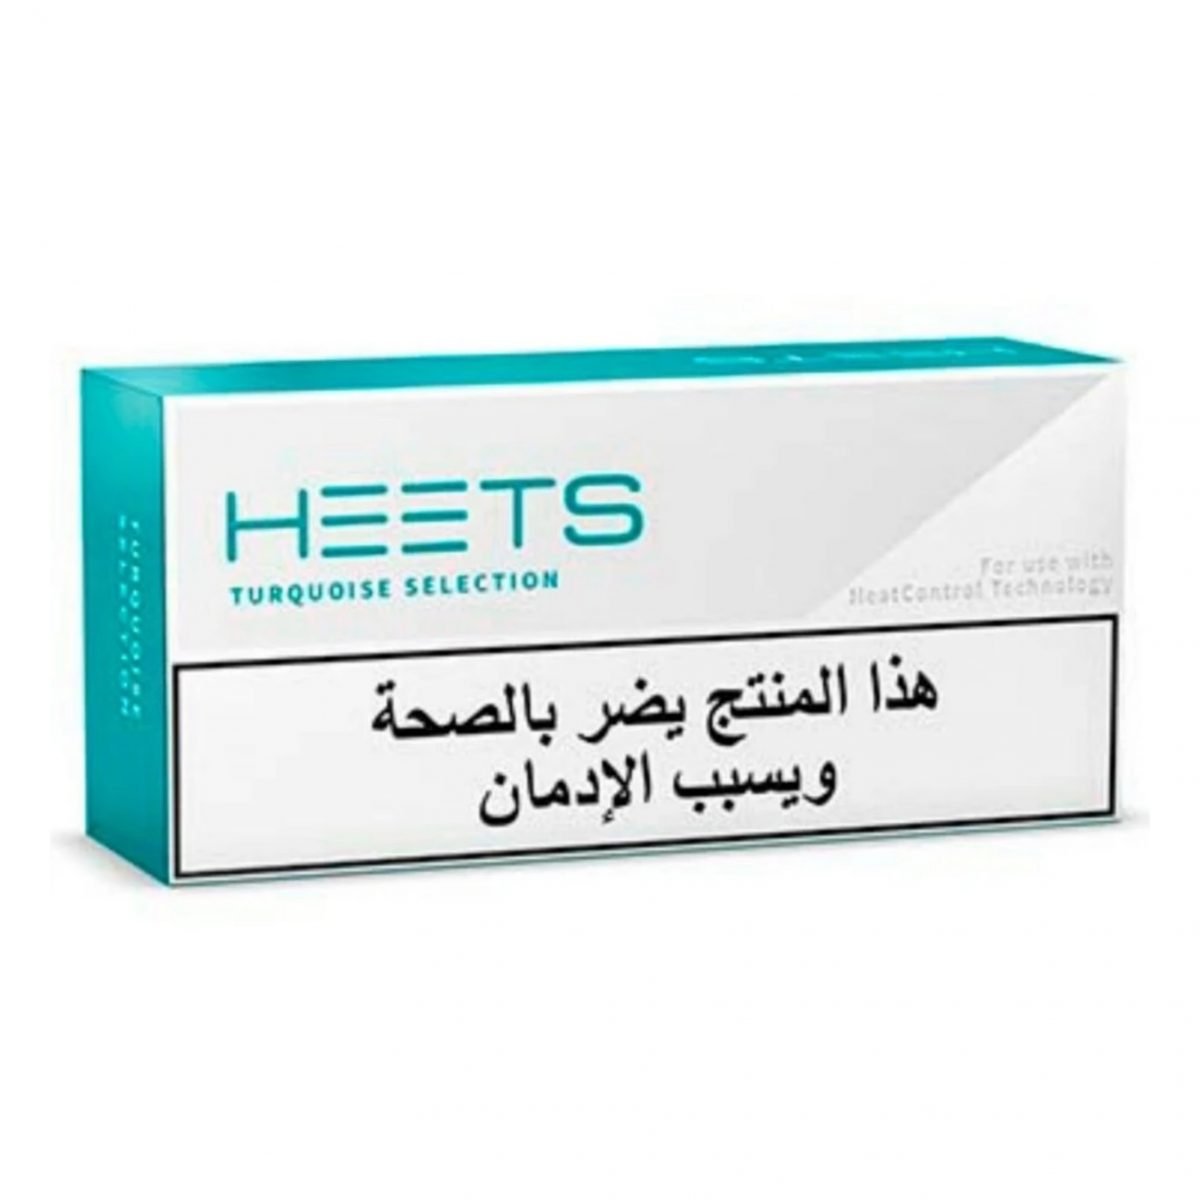 Heets Turquoise Selection Arabic from Lebanon